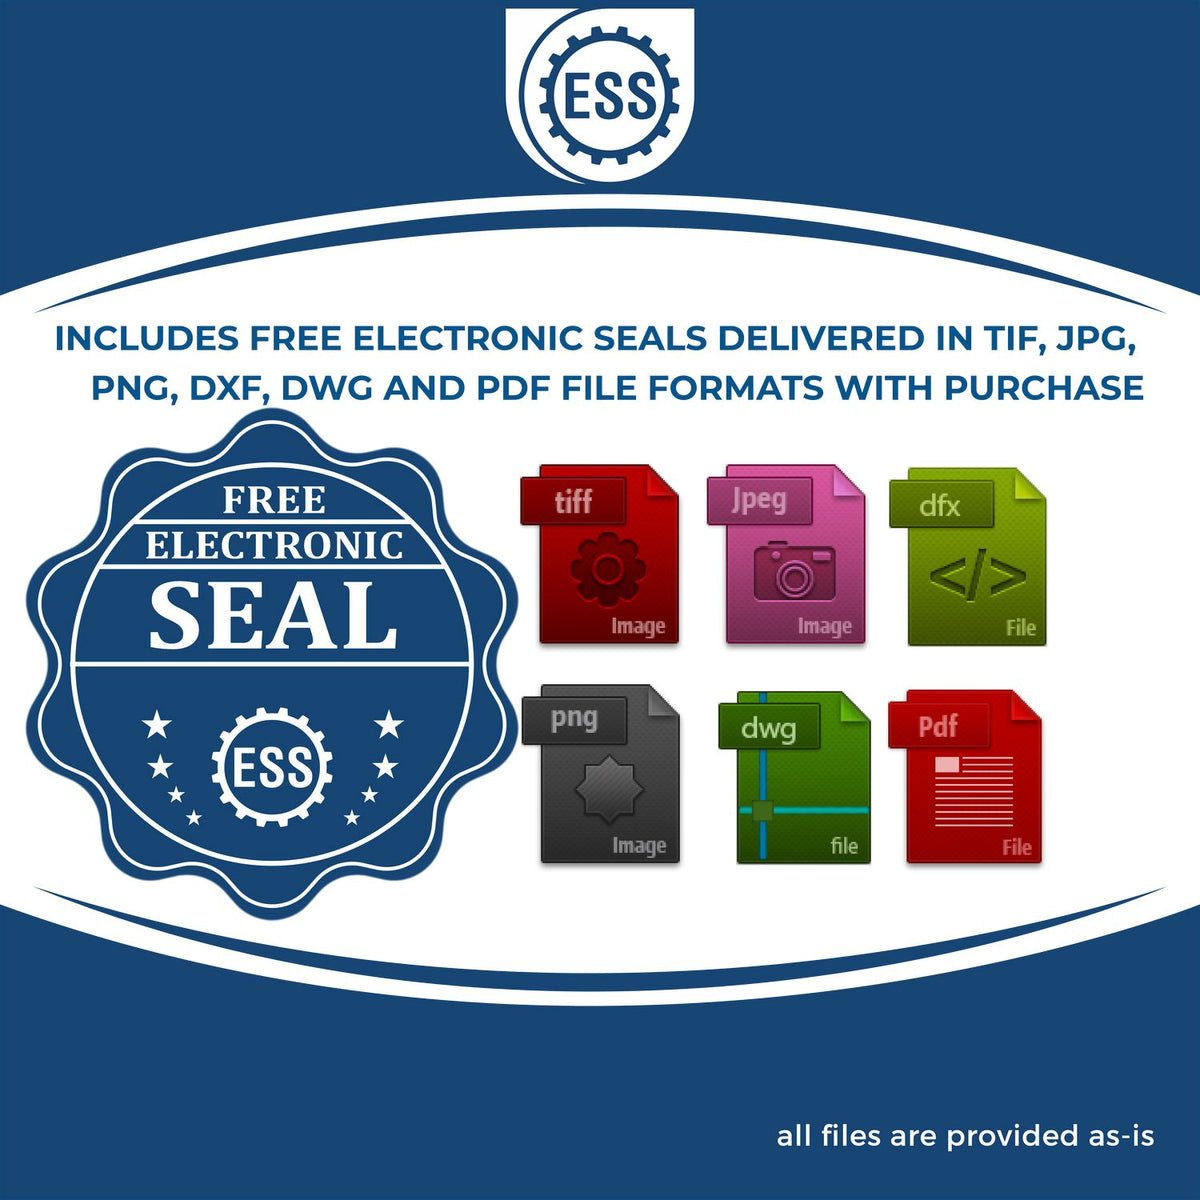 An infographic for the free electronic seal for the Slim Pre-Inked Maine Landscape Architect Seal Stamp illustrating the different file type icons such as DXF, DWG, TIF, JPG and PNG.